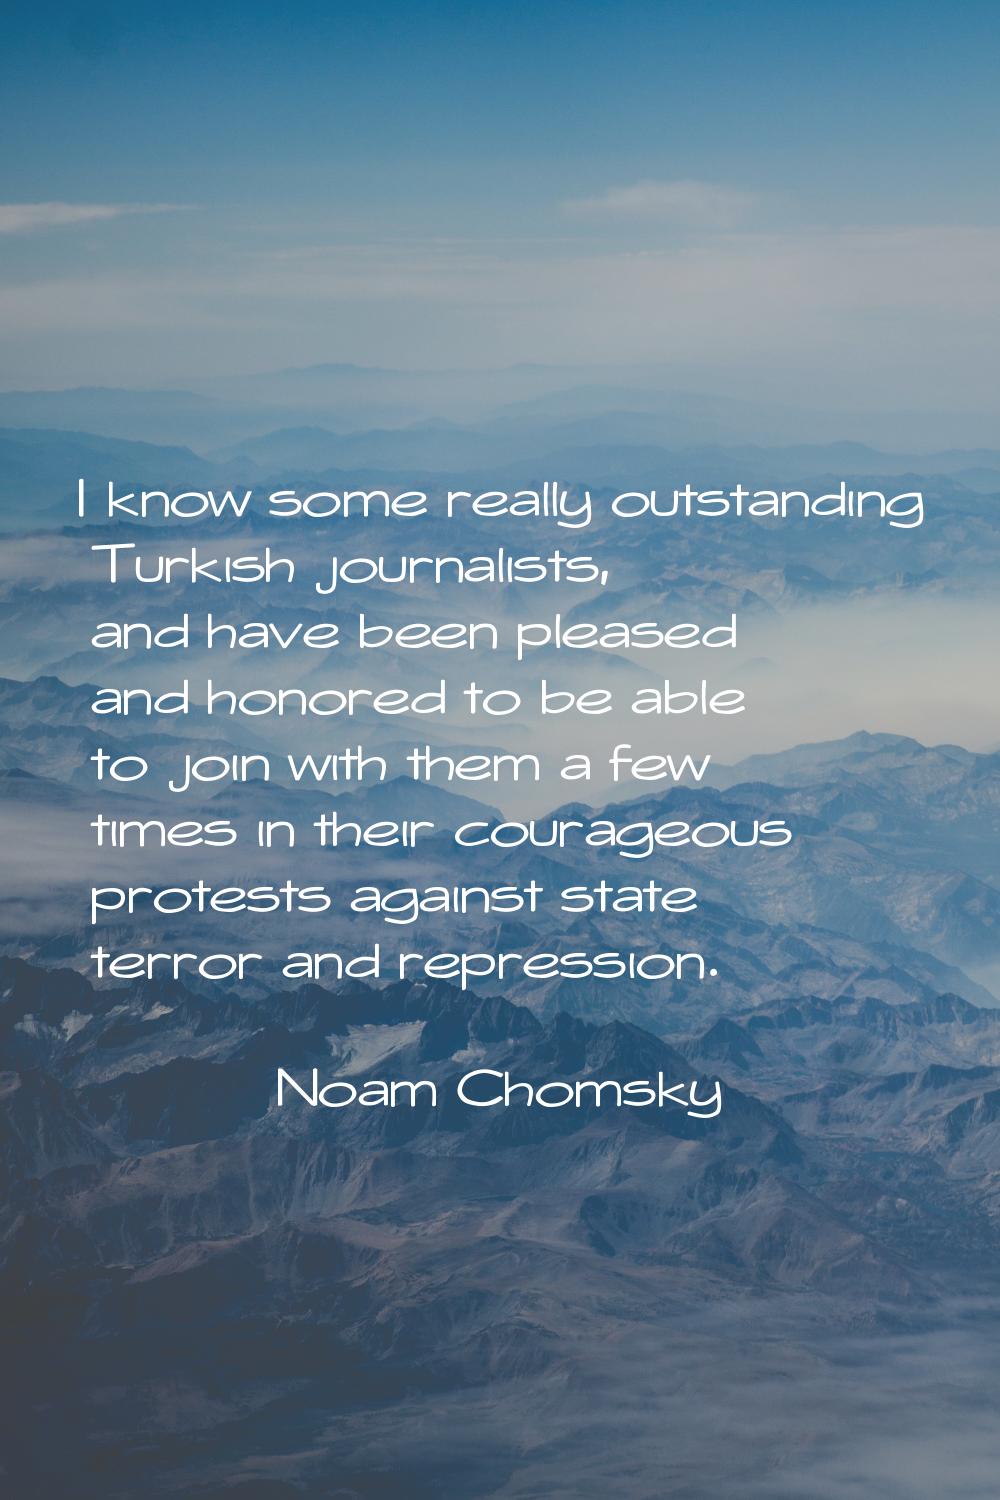 I know some really outstanding Turkish journalists, and have been pleased and honored to be able to